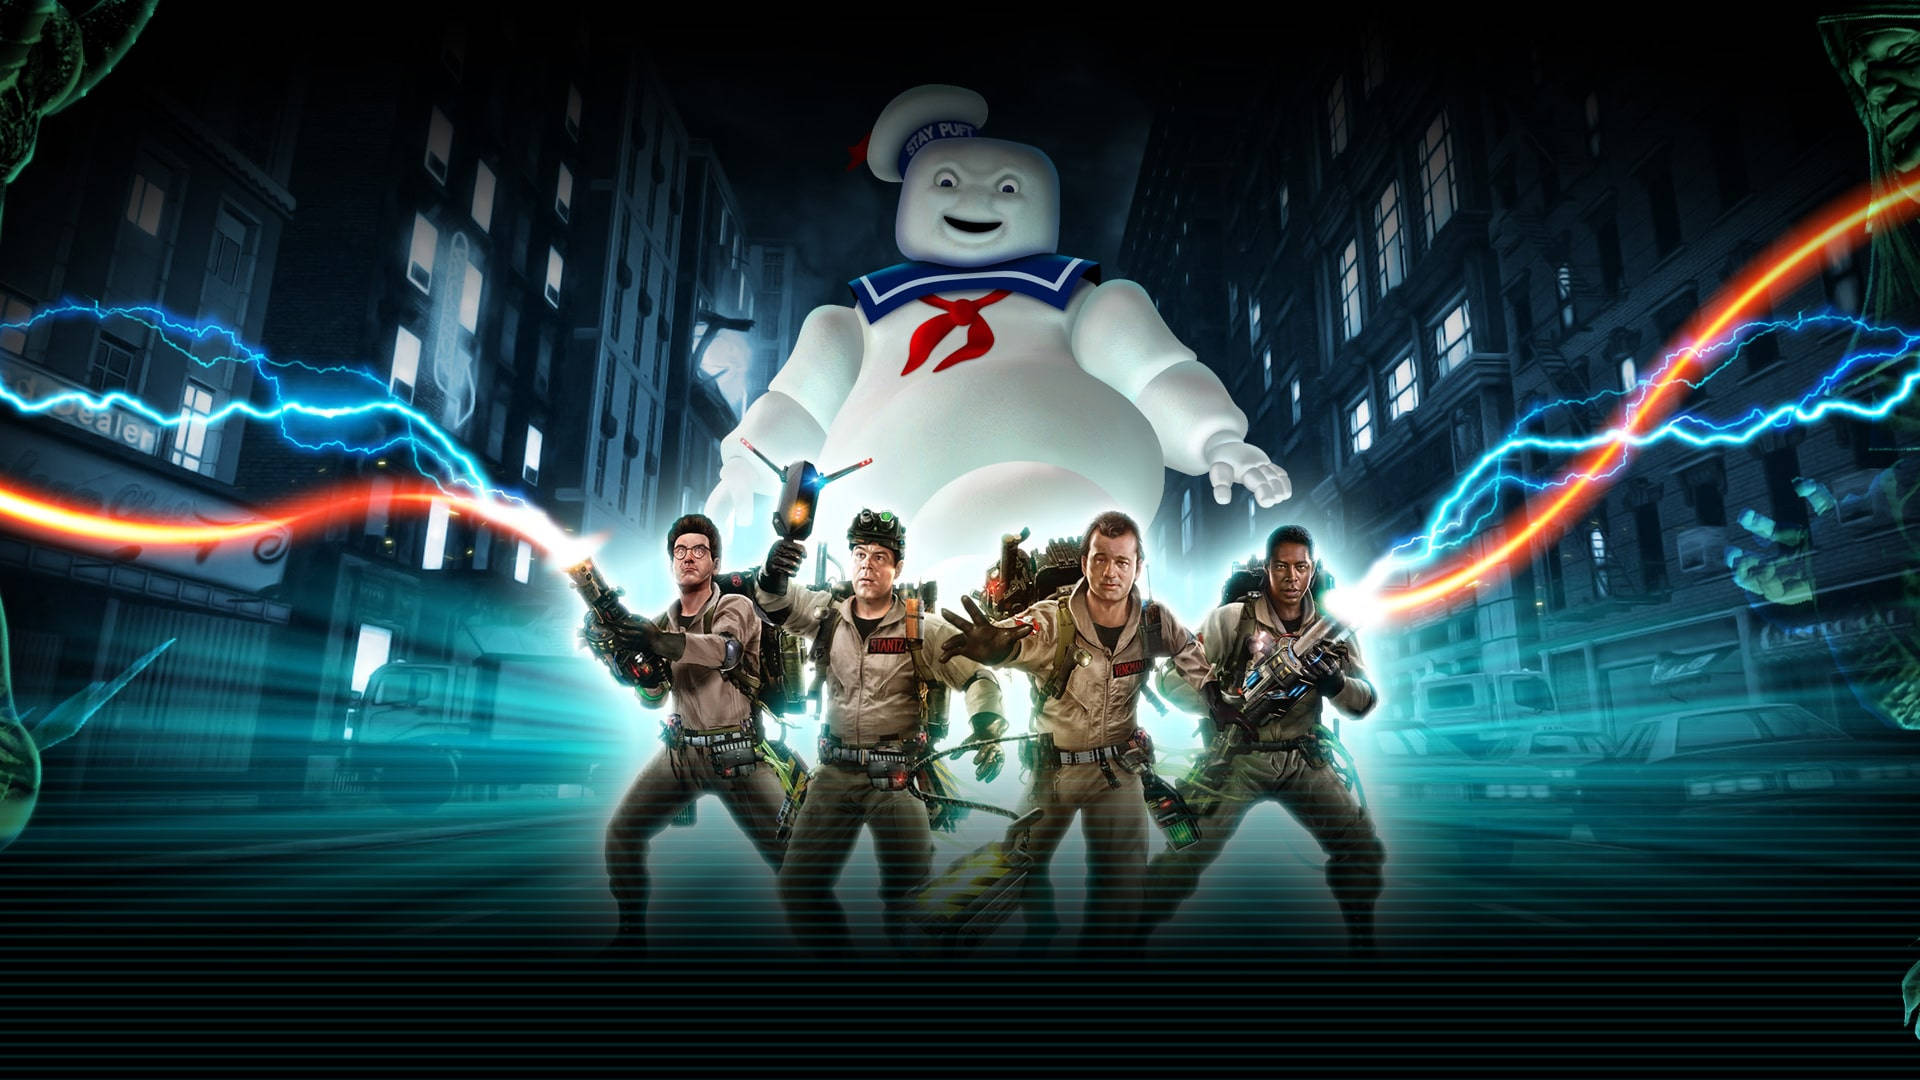 Stay Puft Marshmallow Man causes chaos in Ghostbusters Wallpaper